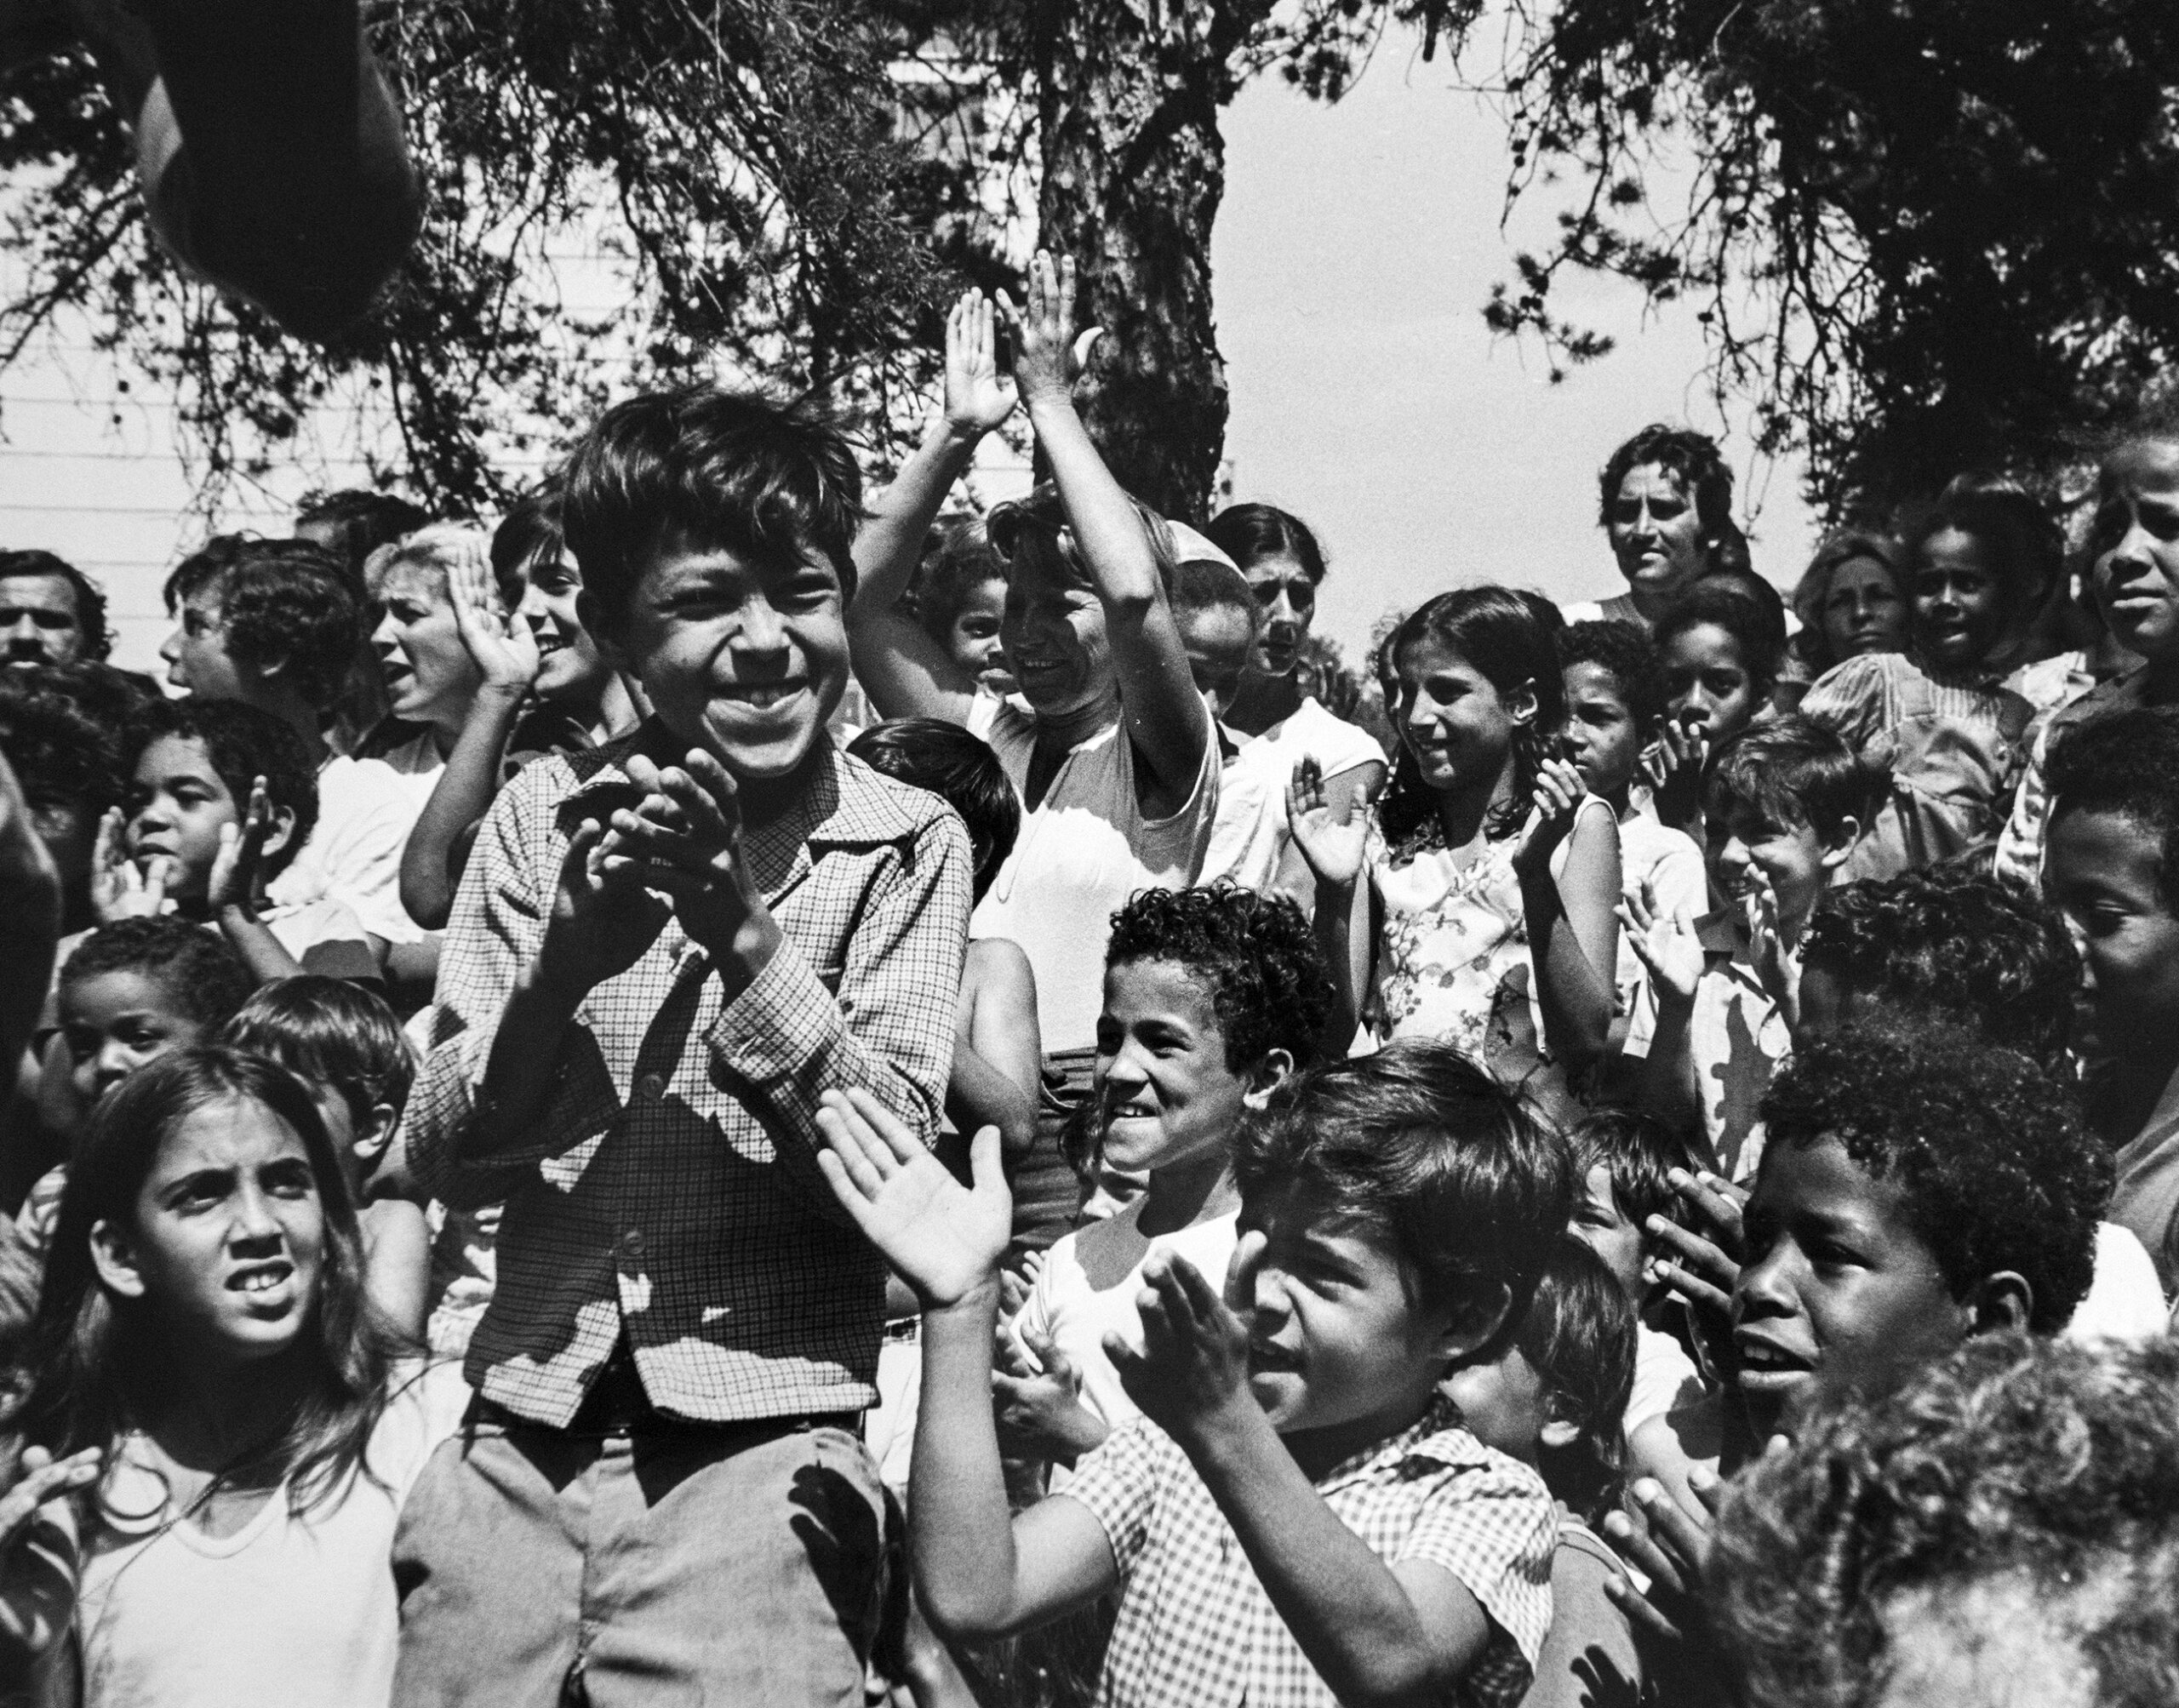 Cuban refugee children smiling and clapping